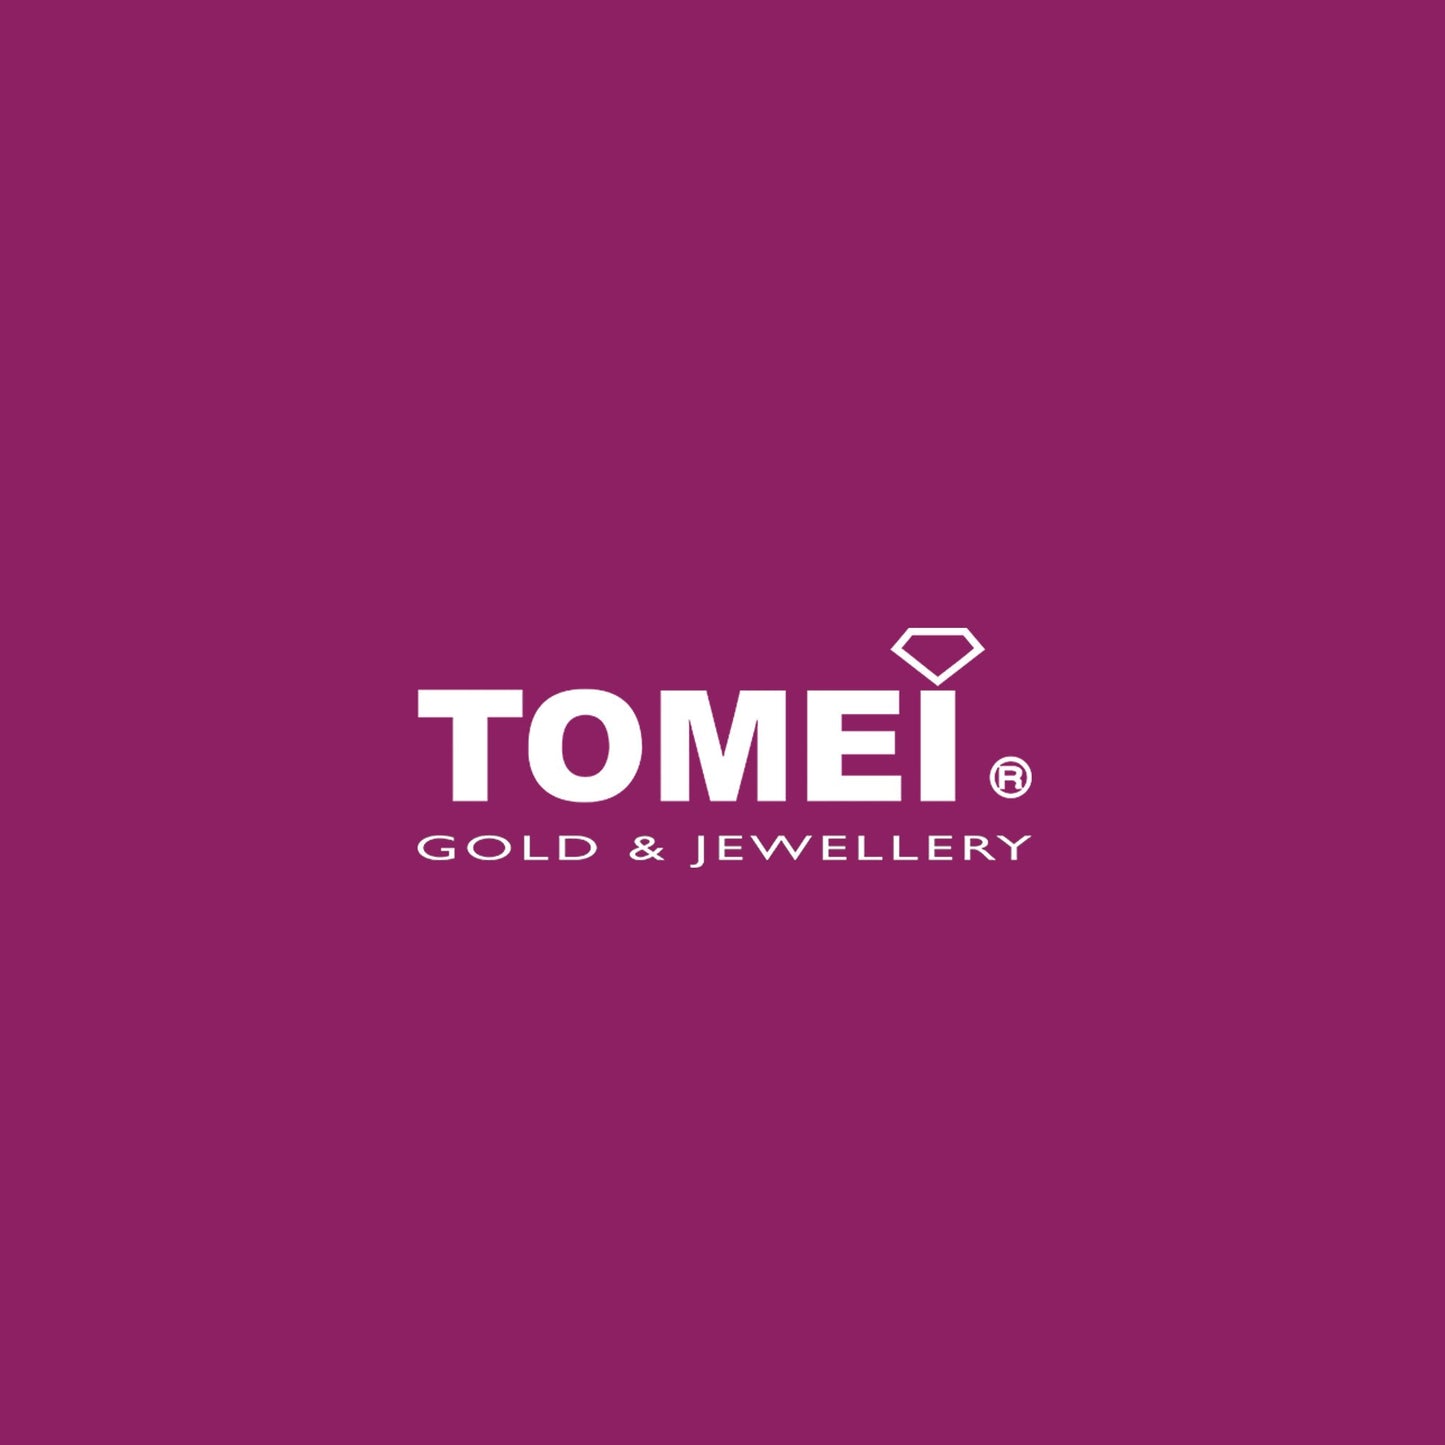 TOMEI Love Charm/Pendant with Ribbon Bow | White Gold 585 (14K) (P5619)